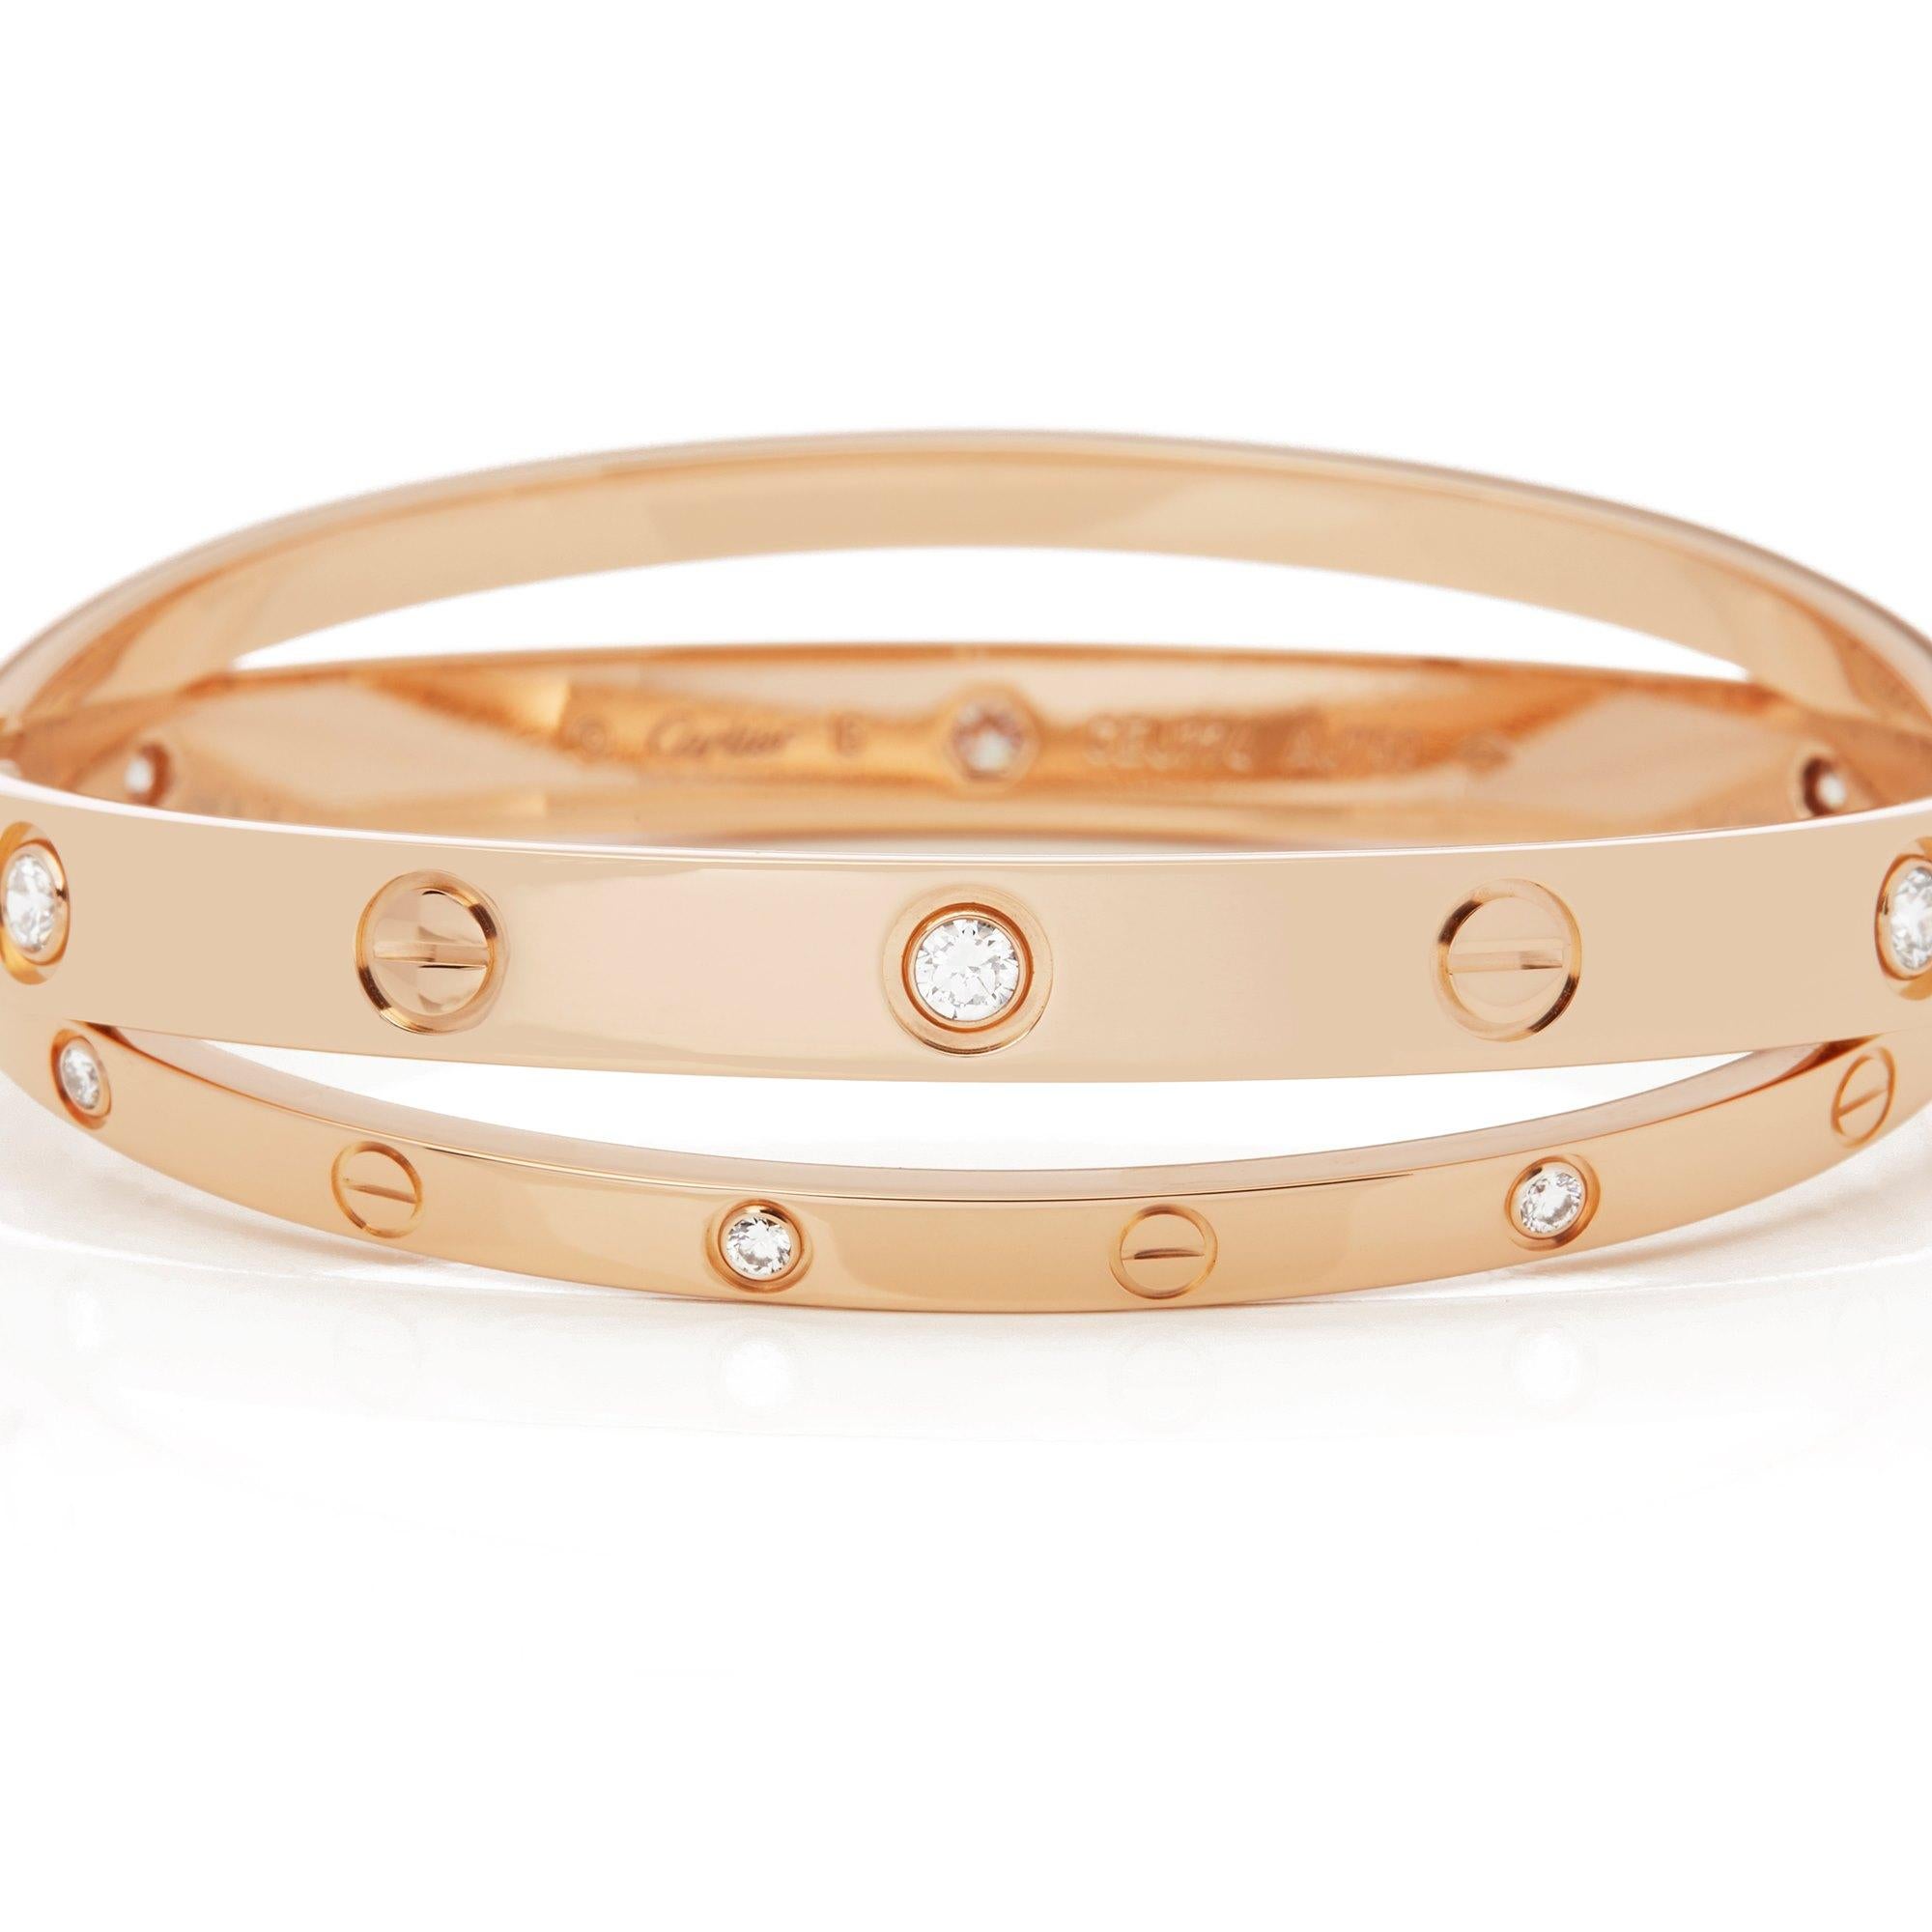 This Bangle by Cartier is from their Love collection and features Twelve Round Brilliant Cut Diamonds mounted in 18k Rose Gold. Size 16. Complete with Cartier Box and Original Warranty. Our Xupes reference is COMJ205 should you need to quote this.